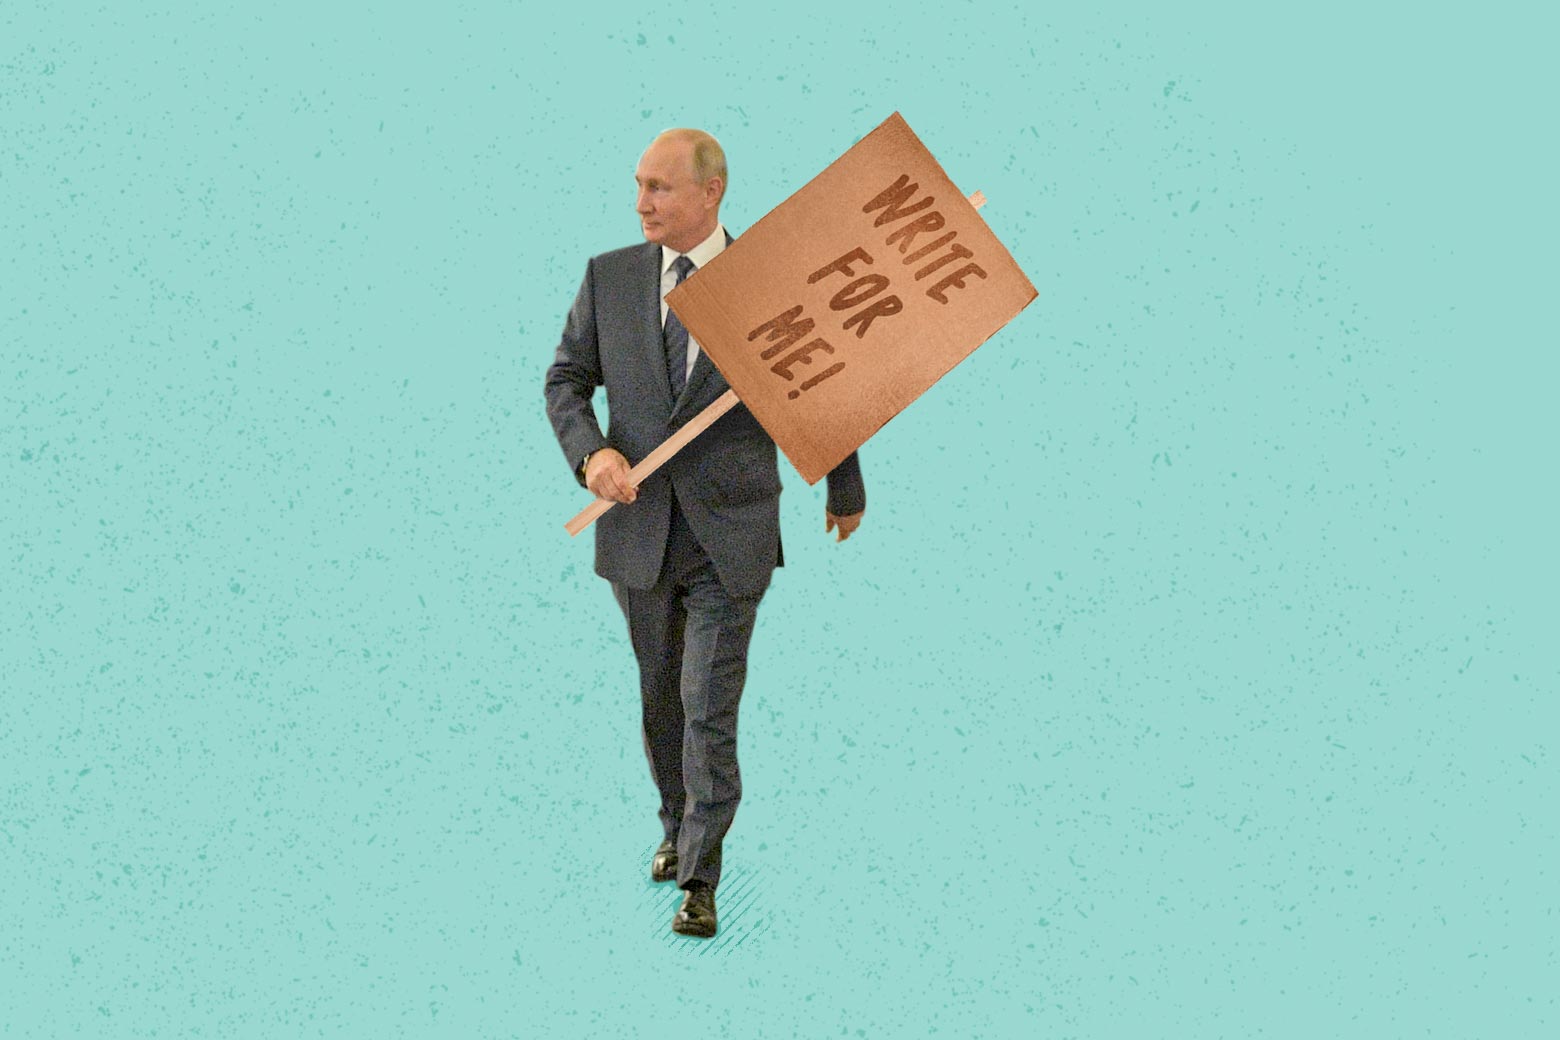 Vladimir Putin holding a sign that reads, "Write for me!"